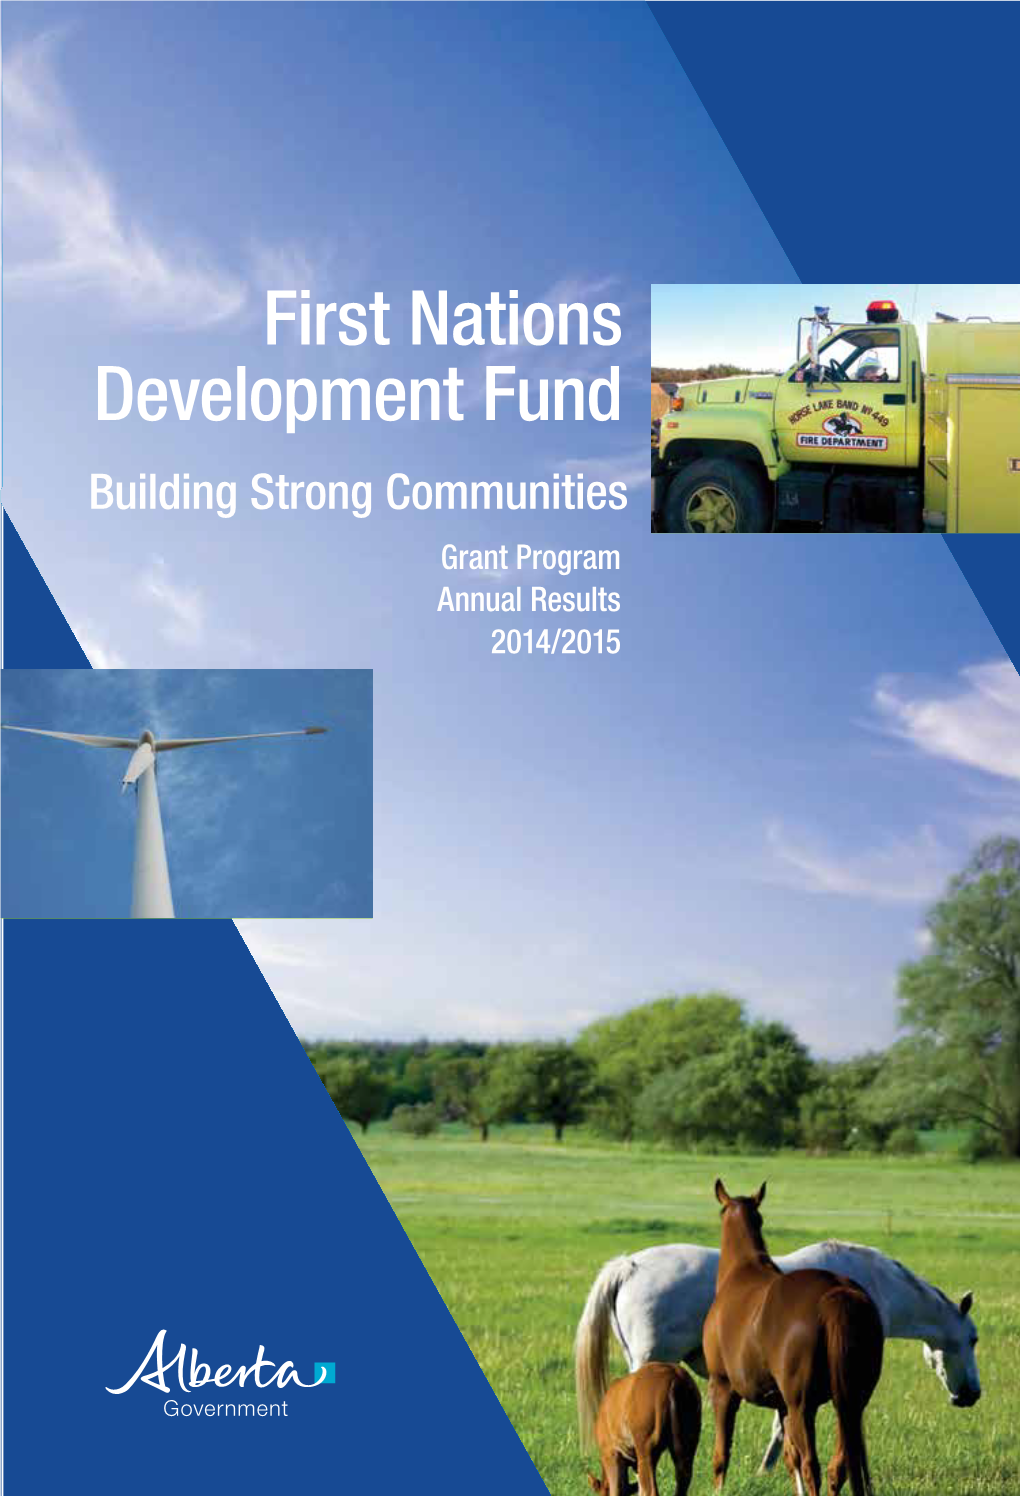 First Nations Development Fund (FNDF) Annual Results 2014-2015